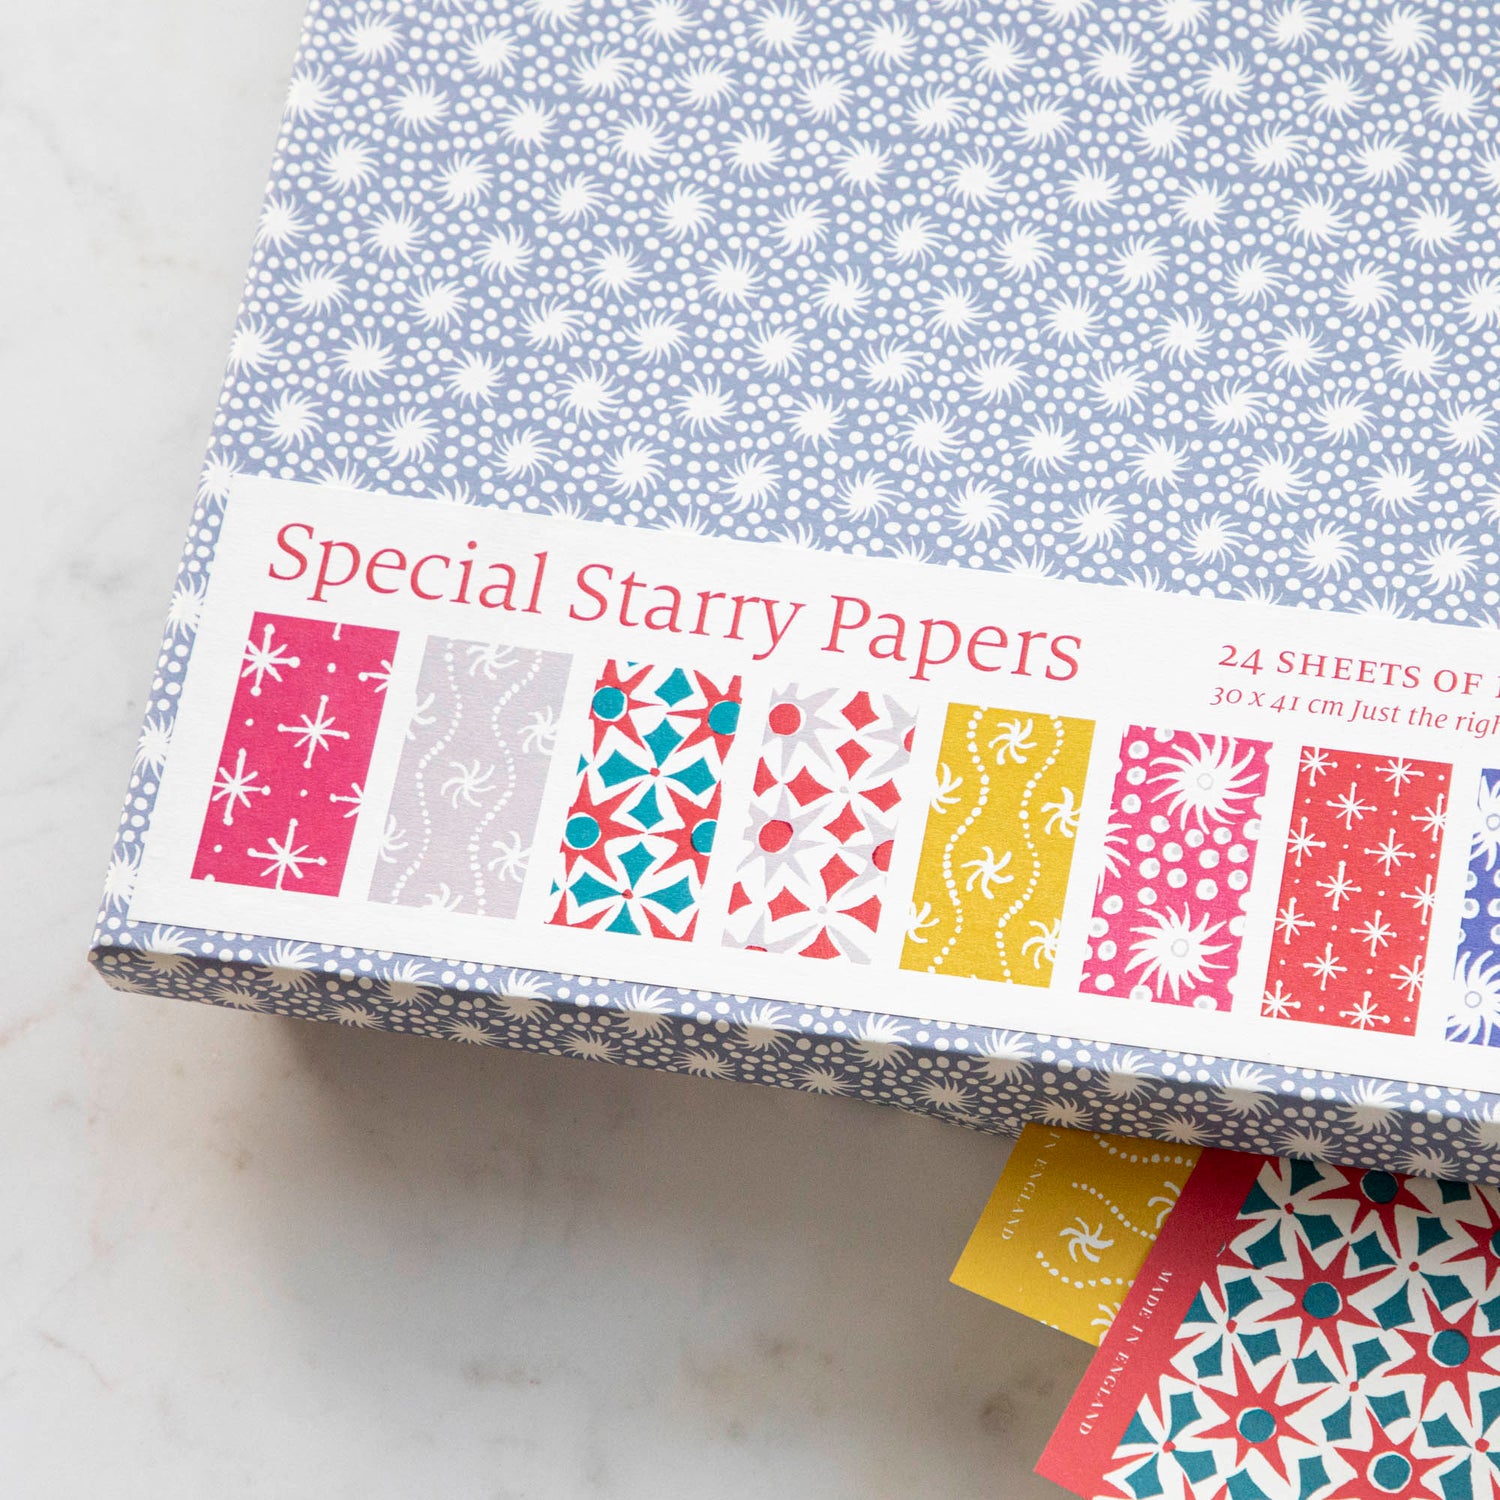 Special Starry Papers